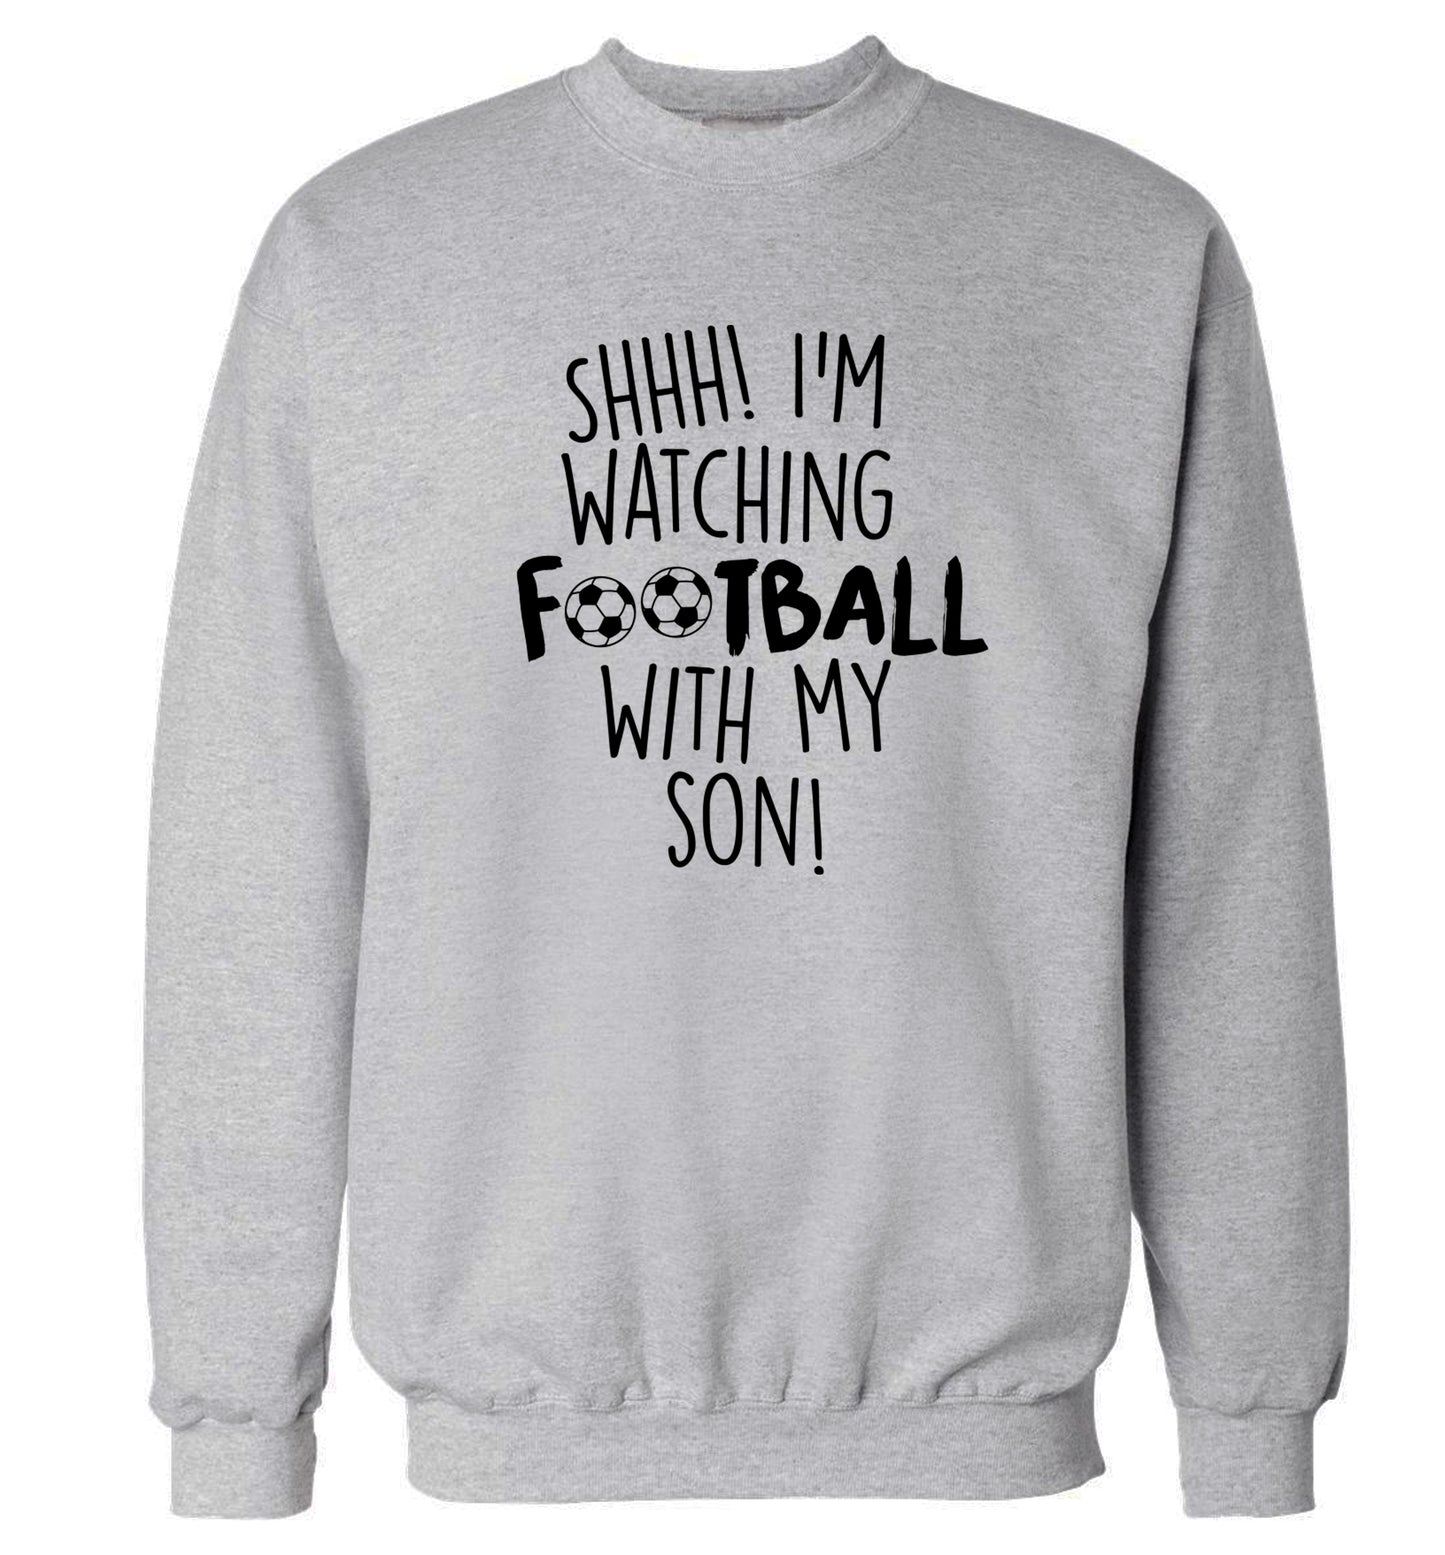 Shhh I'm watching football with my son Adult's unisexgrey Sweater 2XL